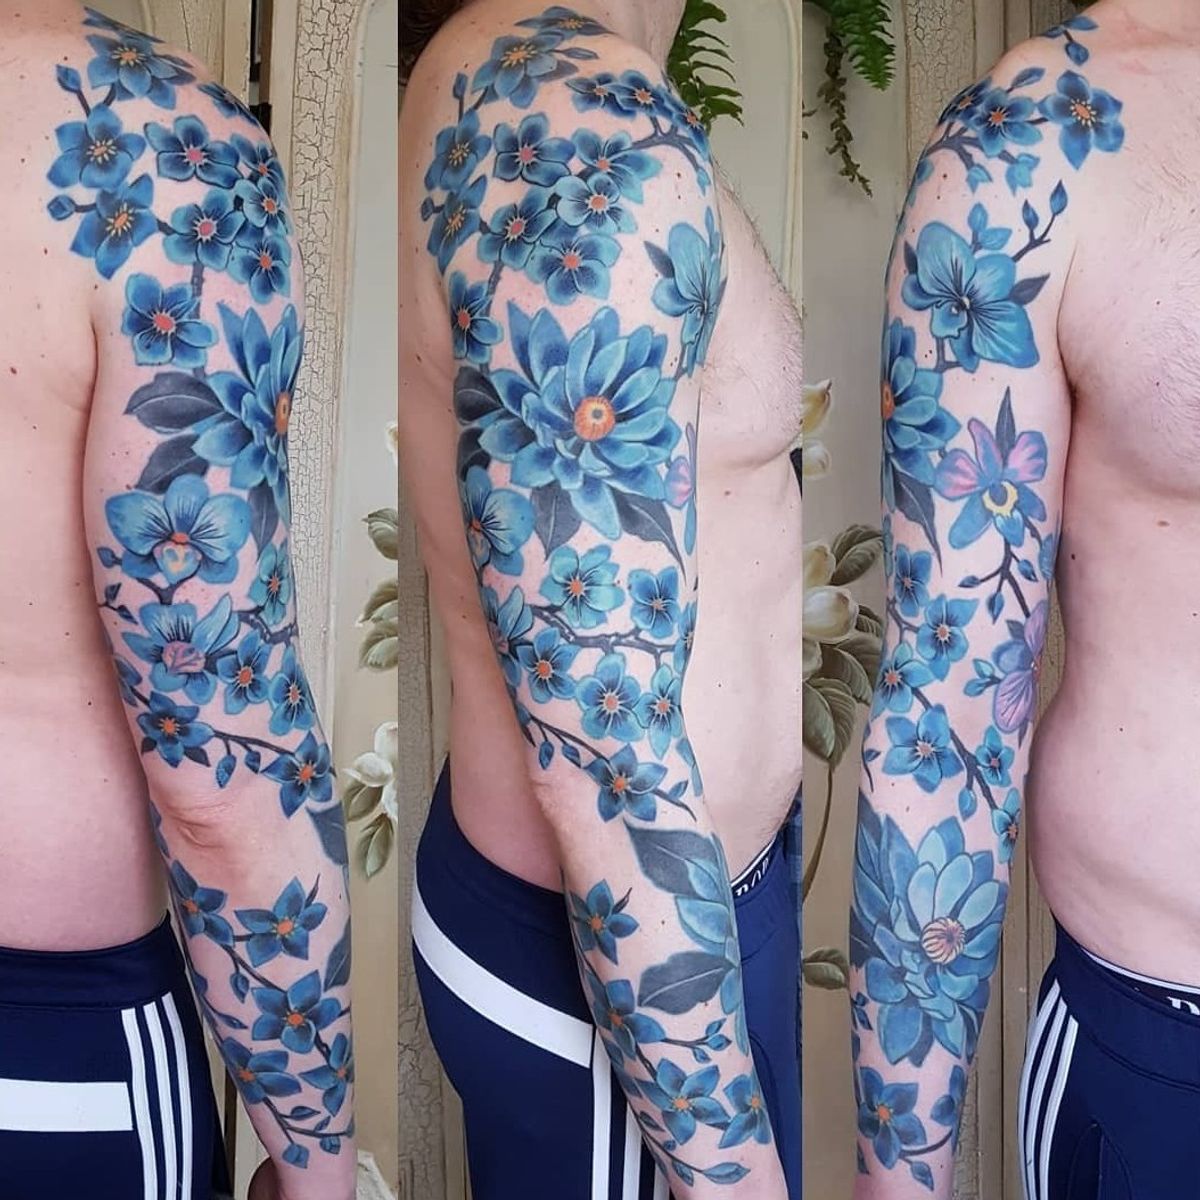 Tattoo uploaded by dorothytattoos • Blue florals - forget-me-nots ...